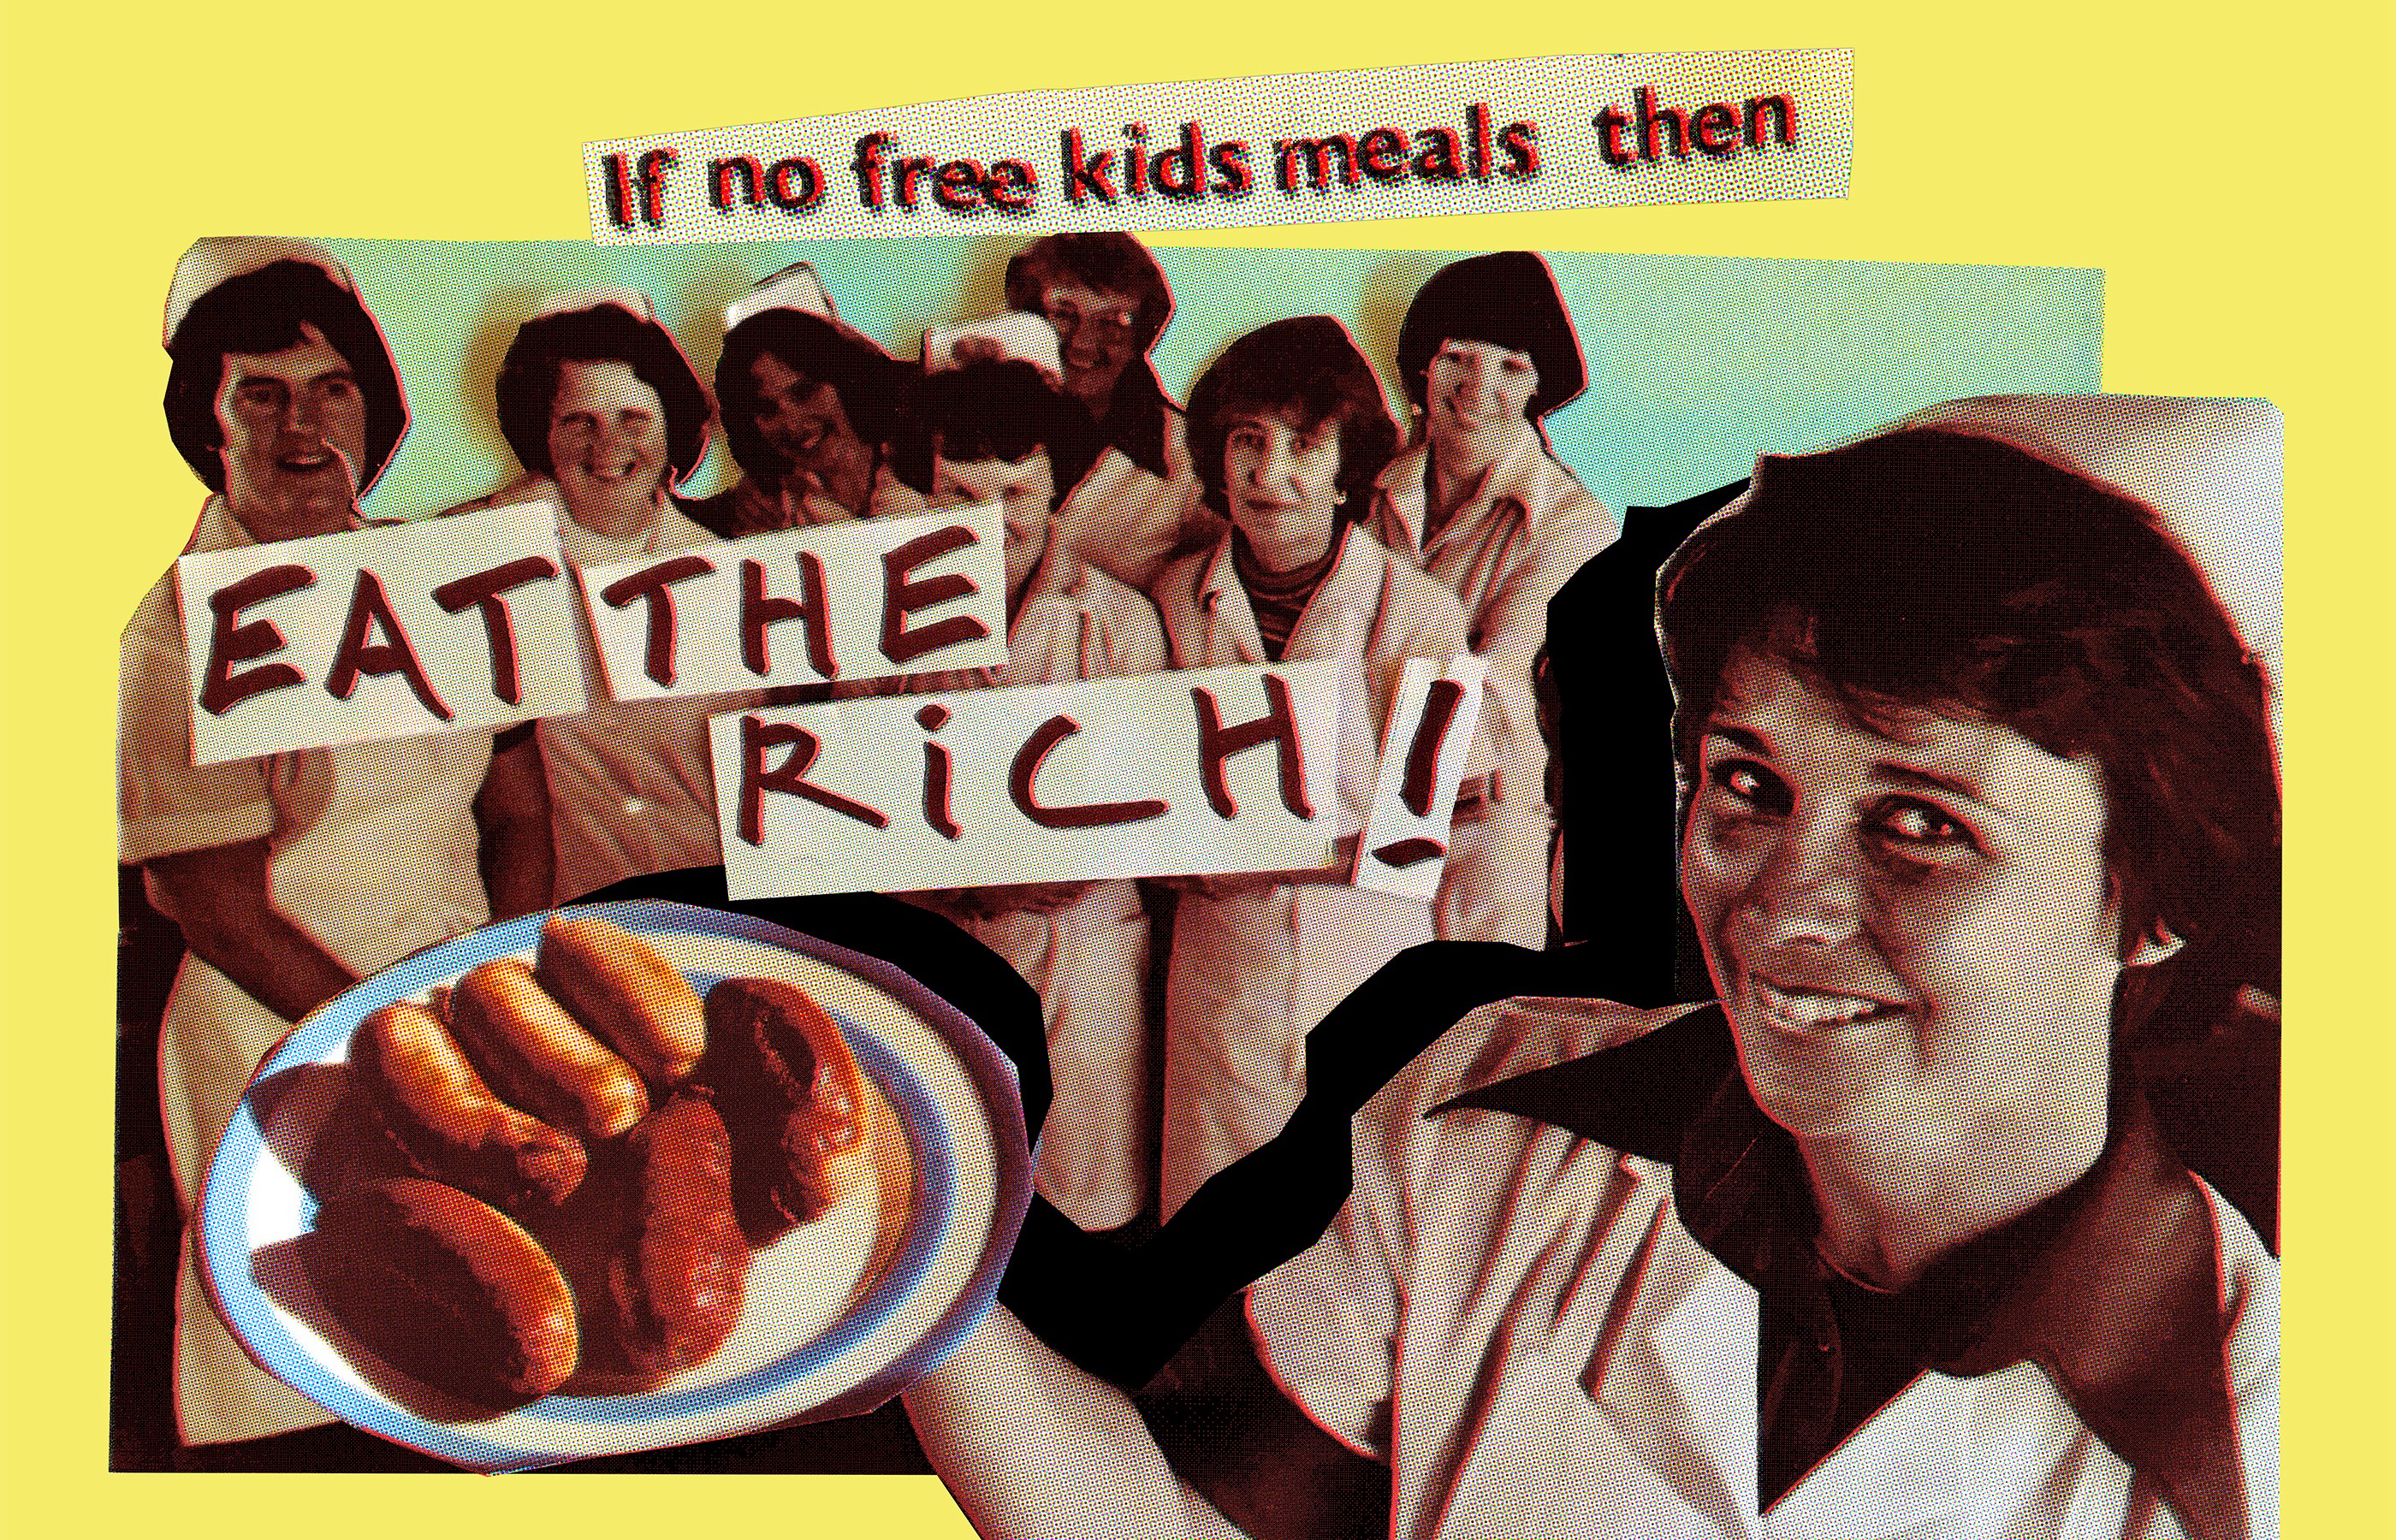 A collage of school dinner ladies holding up a plate of sausages, pasted against a yellow background, with text - 'If no free kids meals then... Eat the Rich.